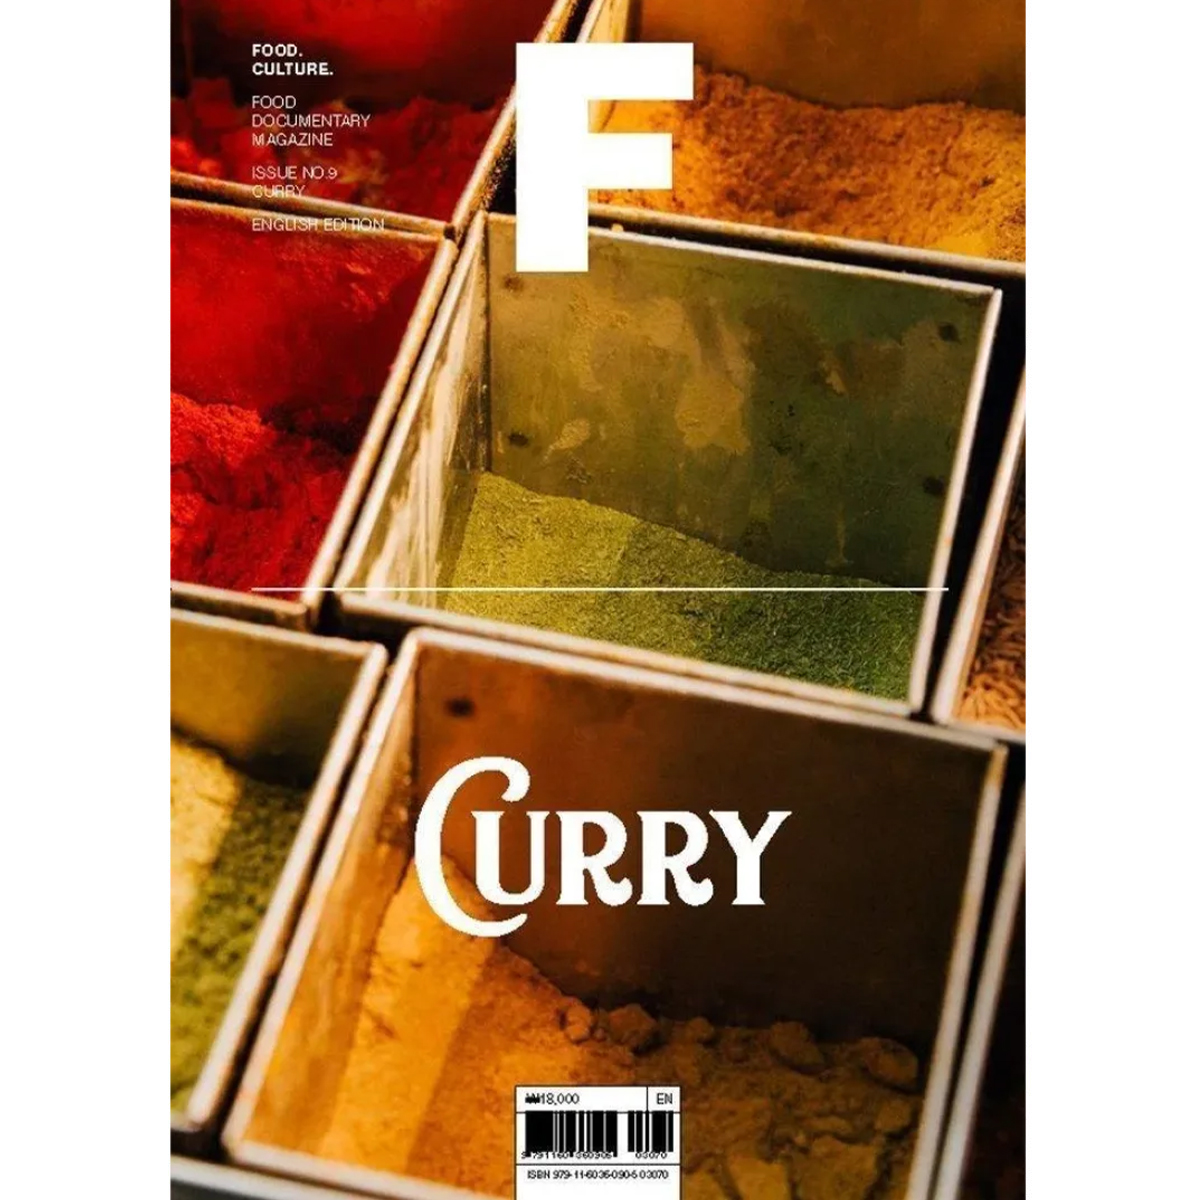 Issue N 9 CURRY